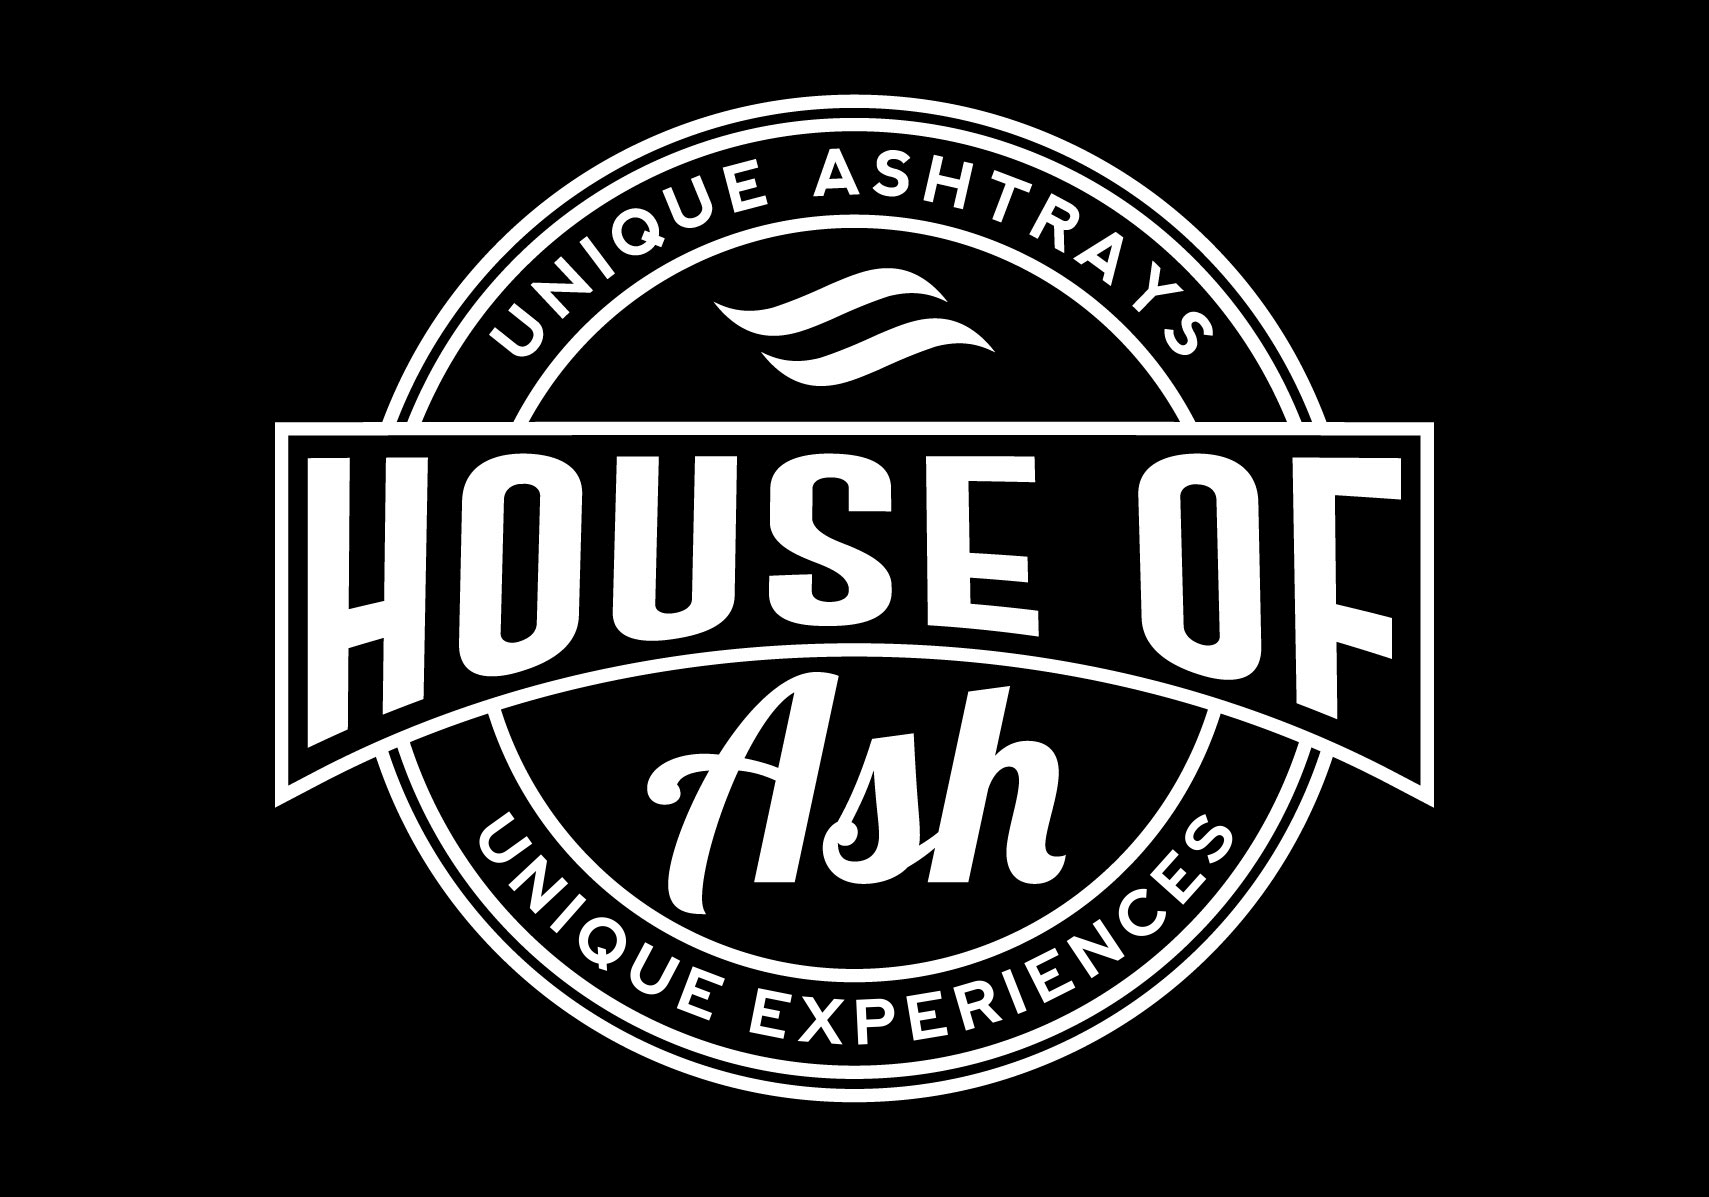 House of Ash